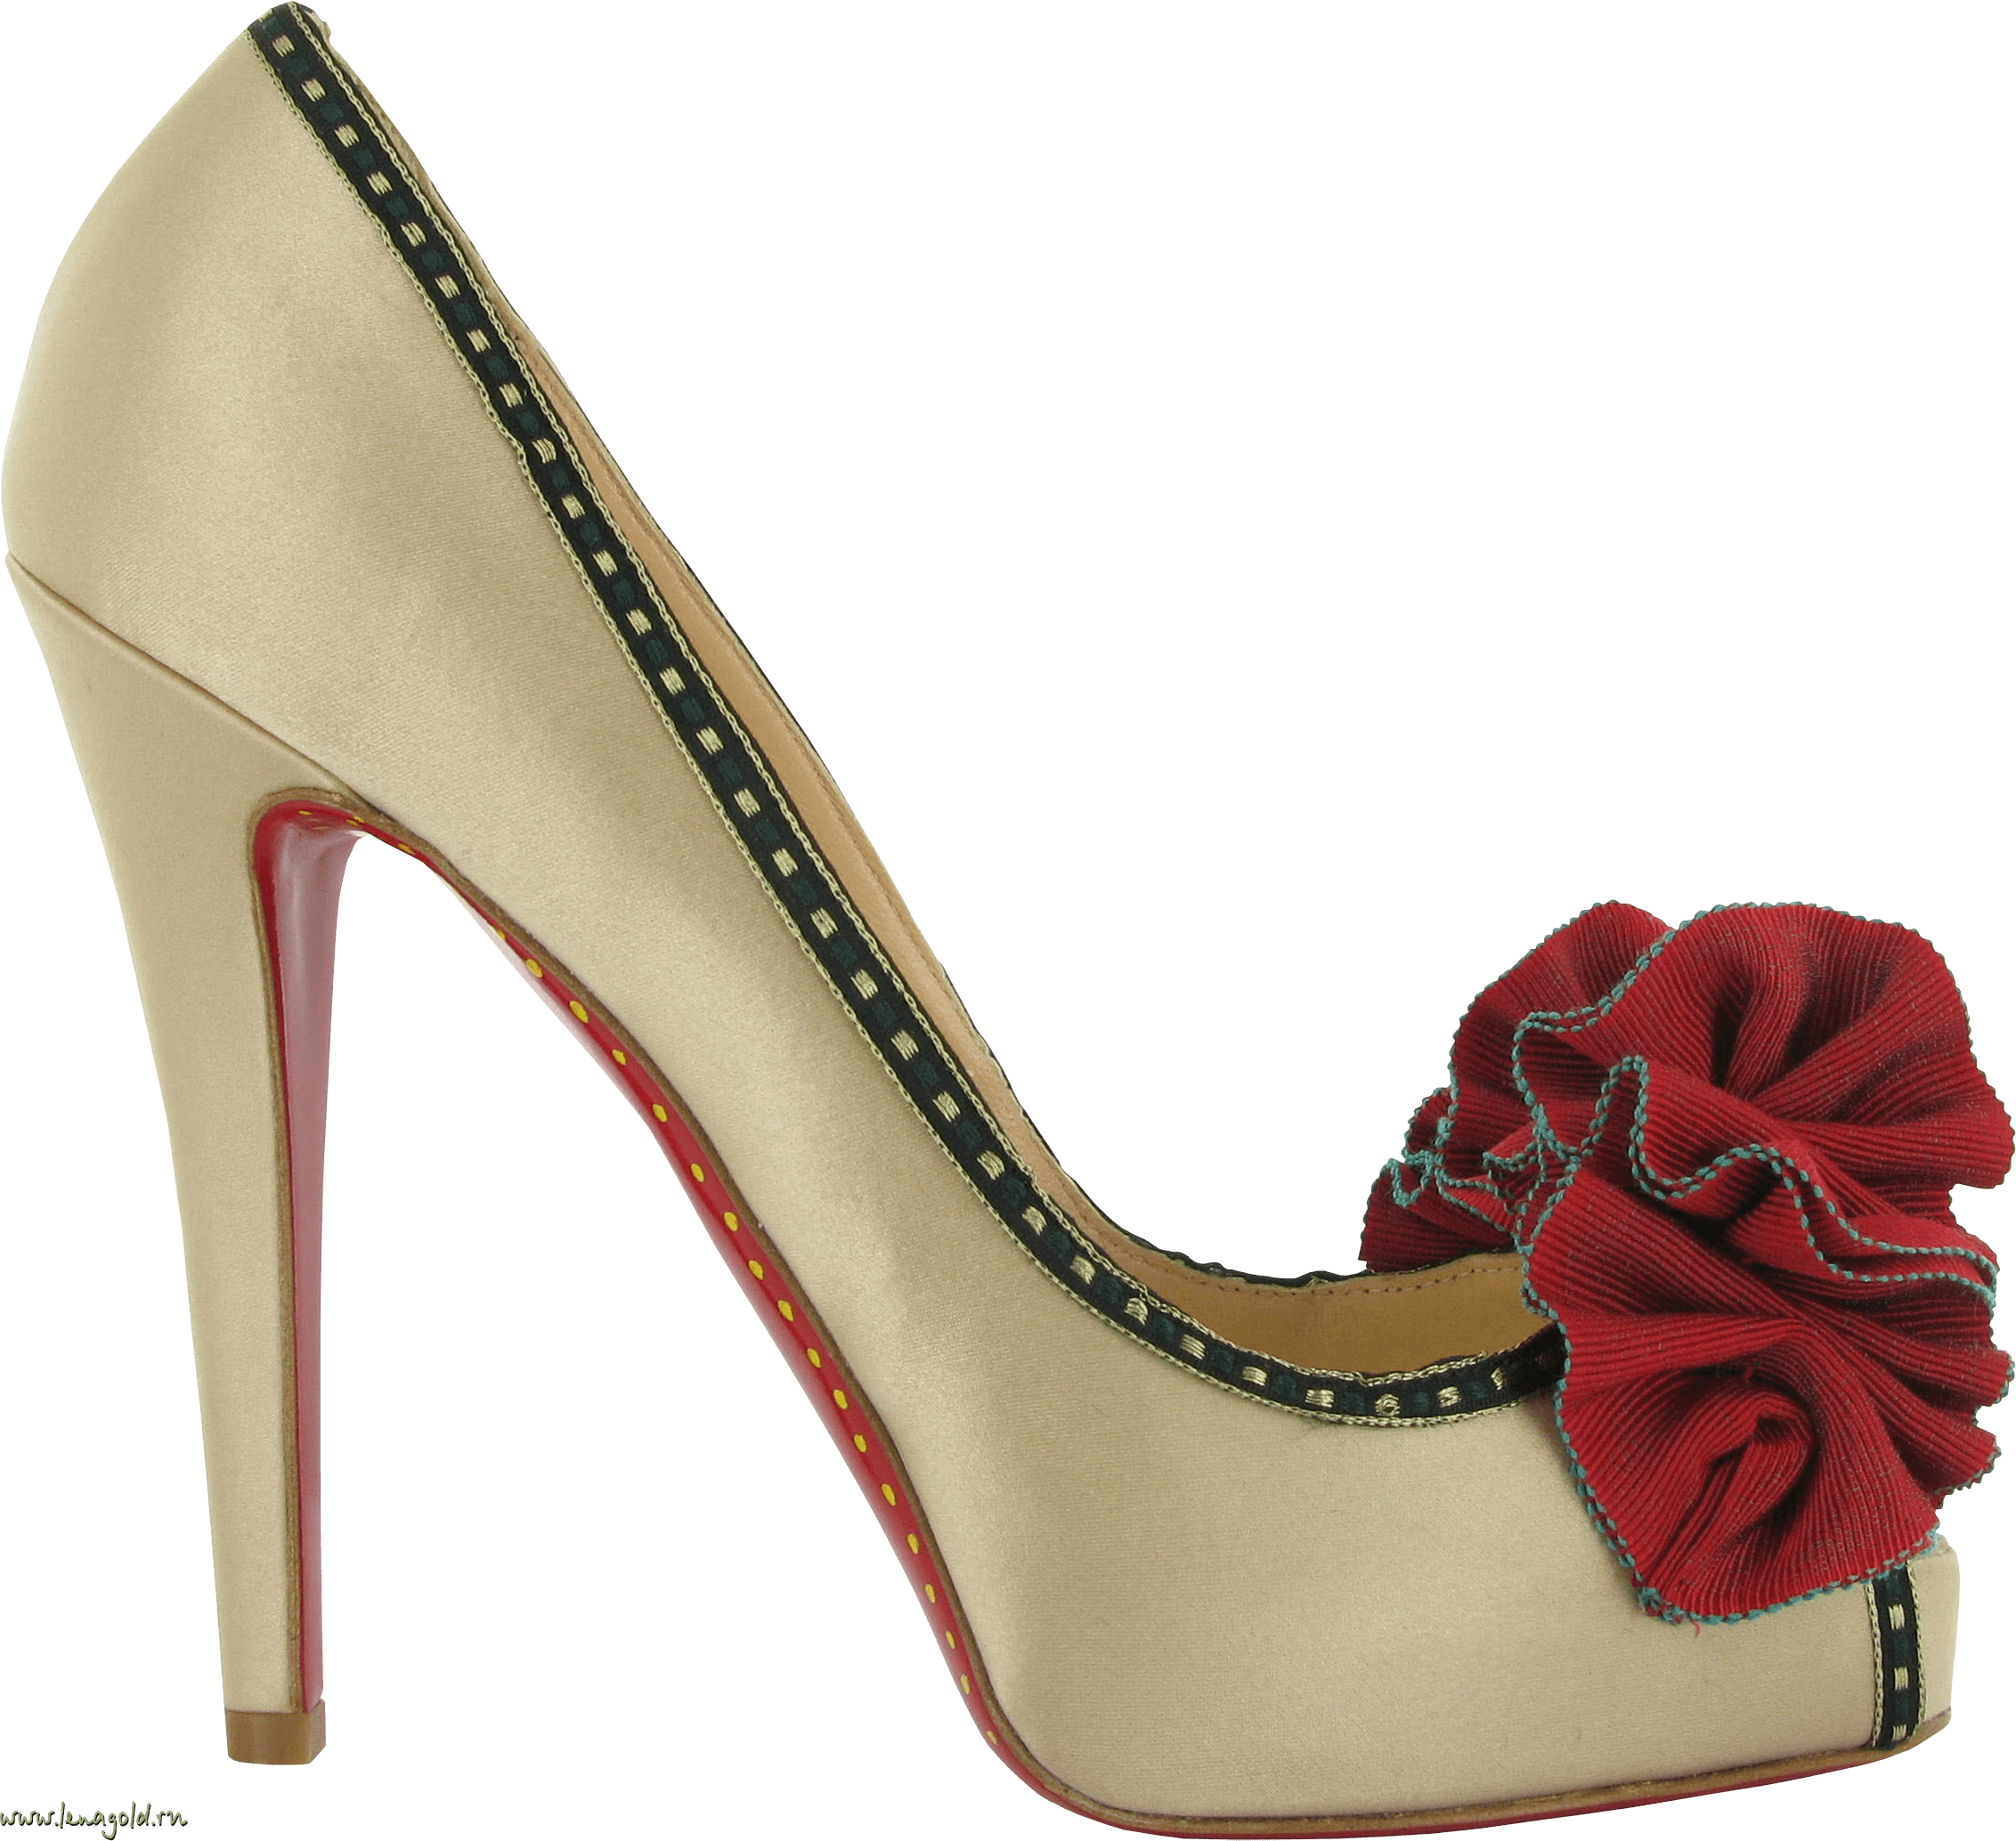 download women shoes png image png image pngimg #29893